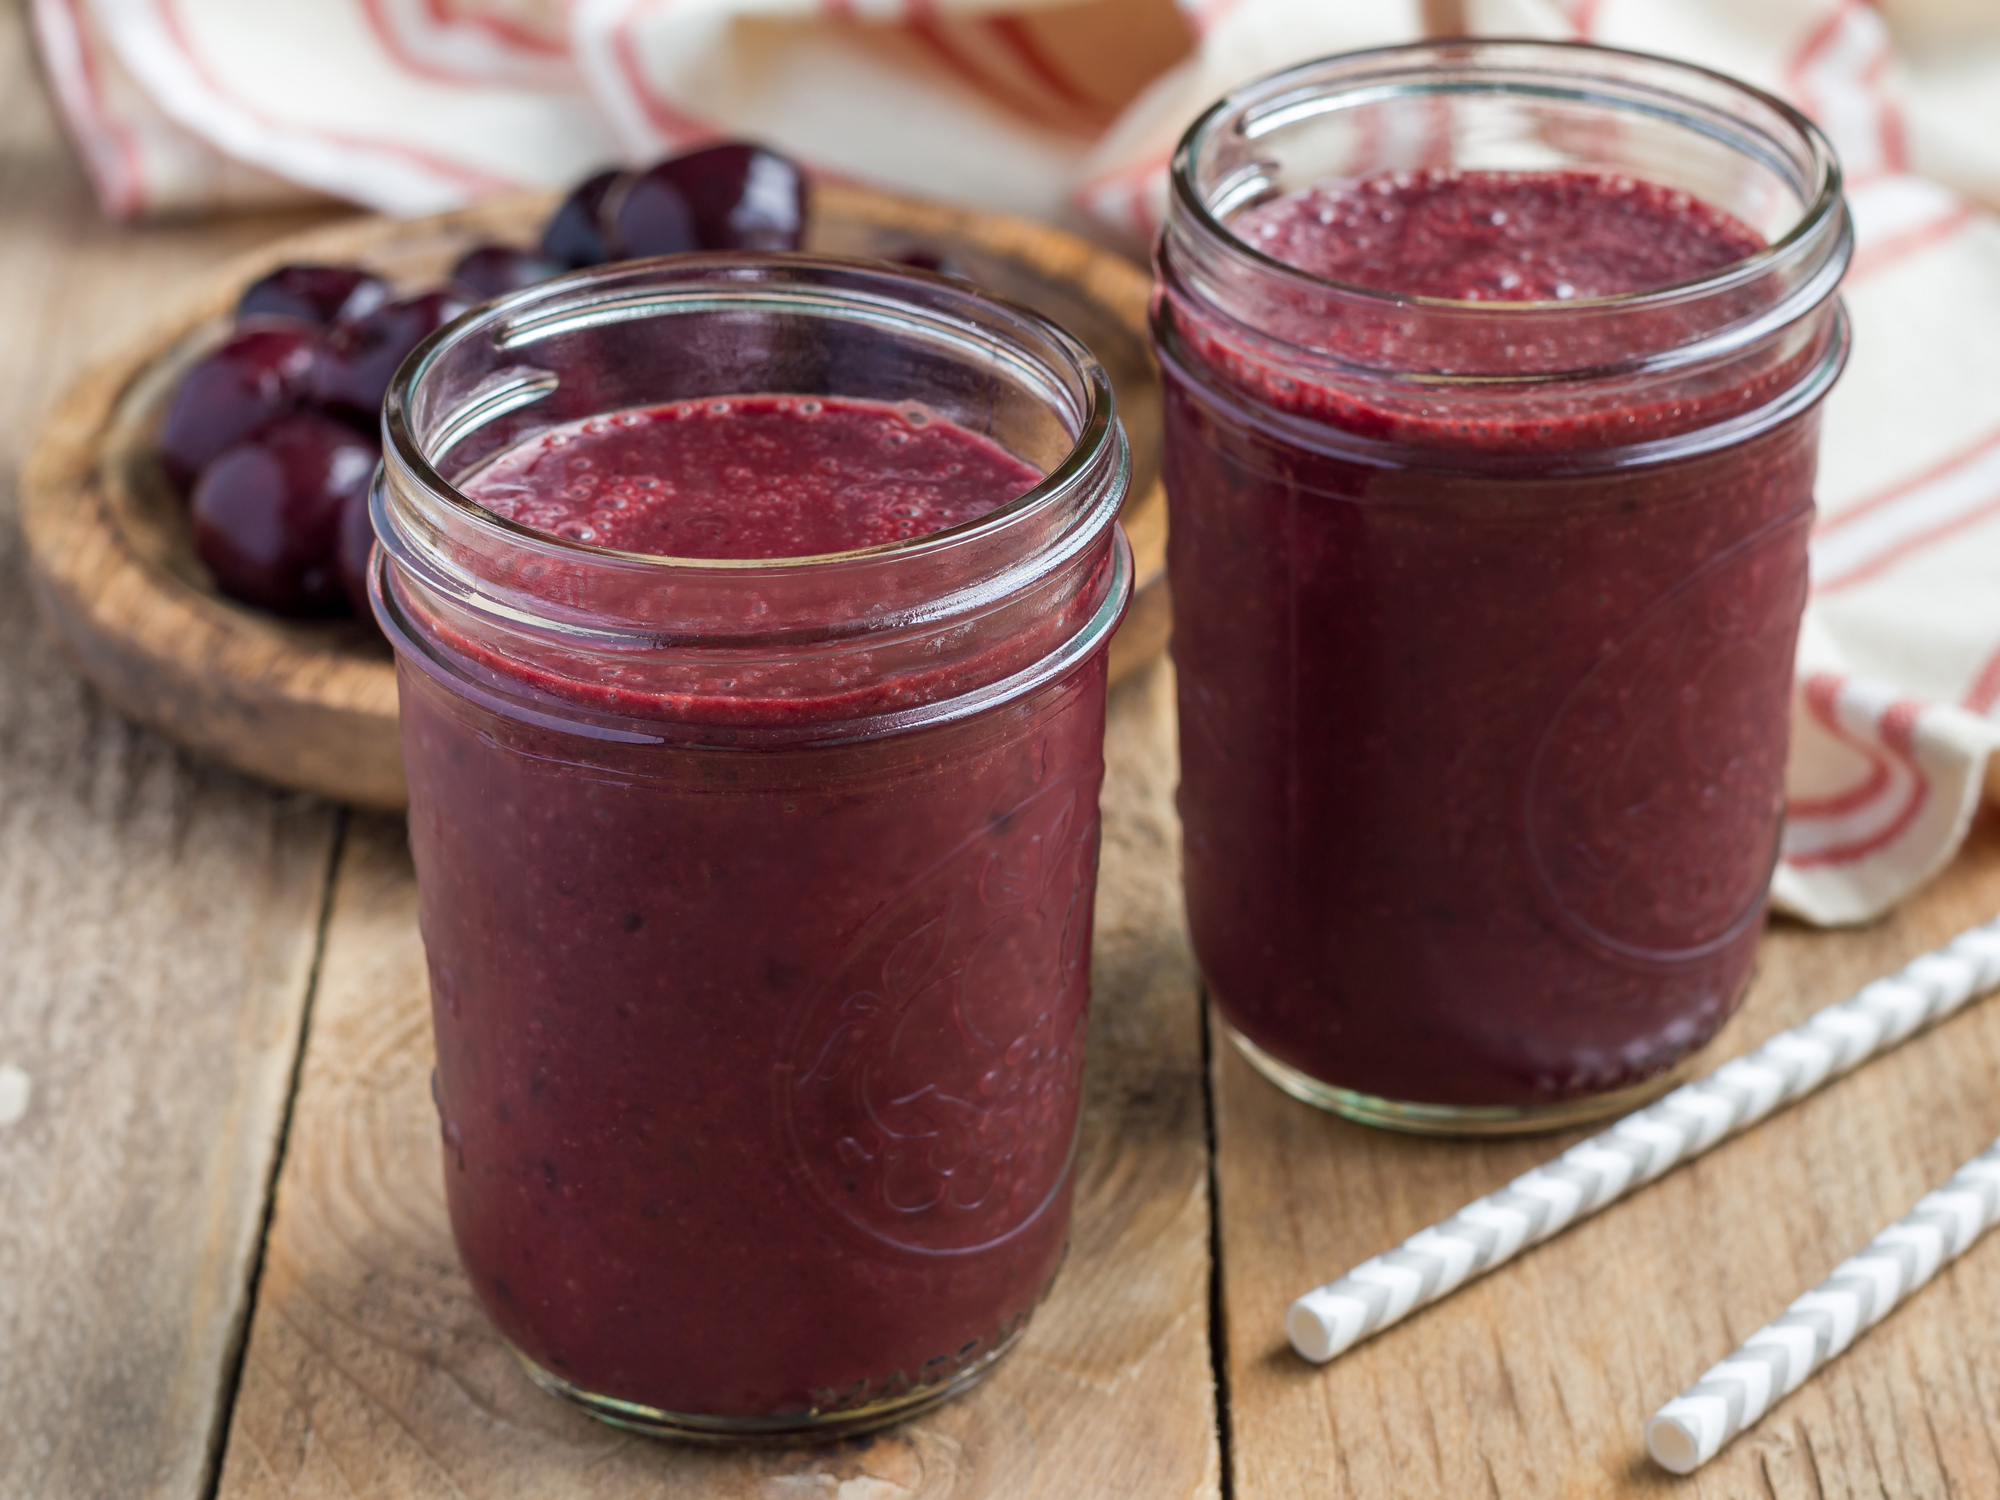 In the kitchen with Kelley: Sleepy time, pain-relieving smoothie